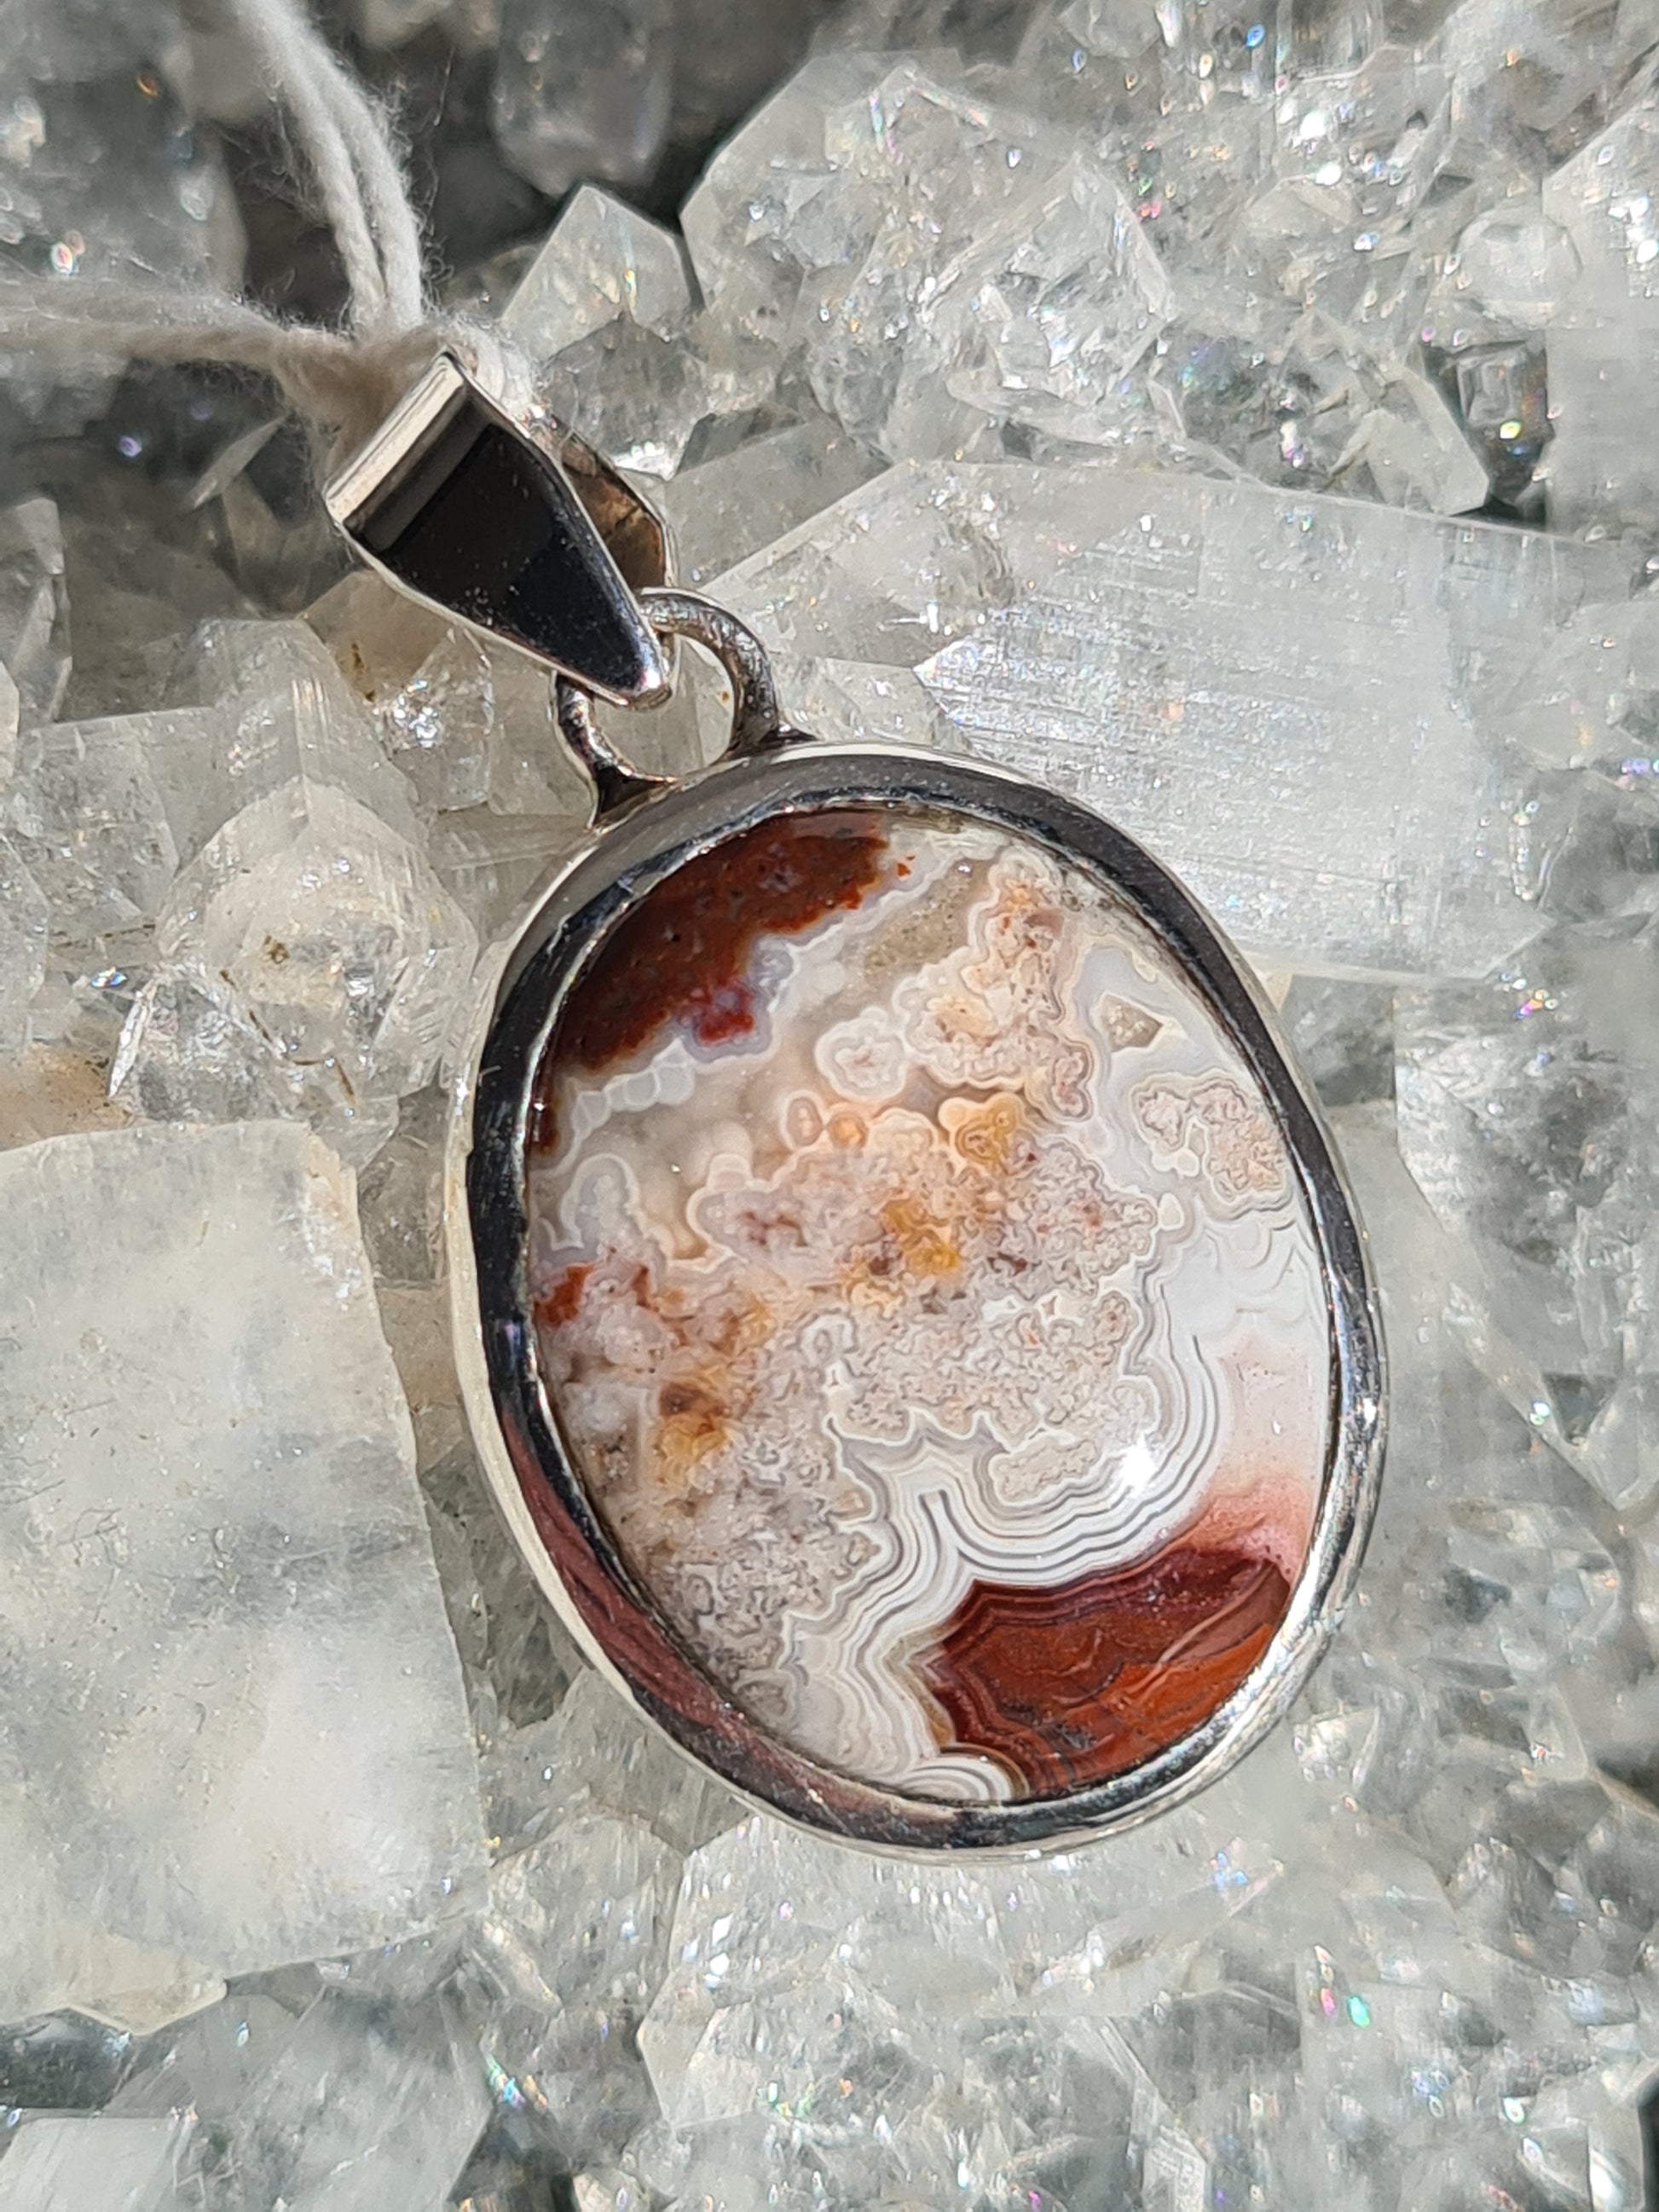 A Mexican crazy lace agate set pendant in sterling silver. Large oval, with red, white and grey banding.
Photographed on an apophyllite cluster background. 